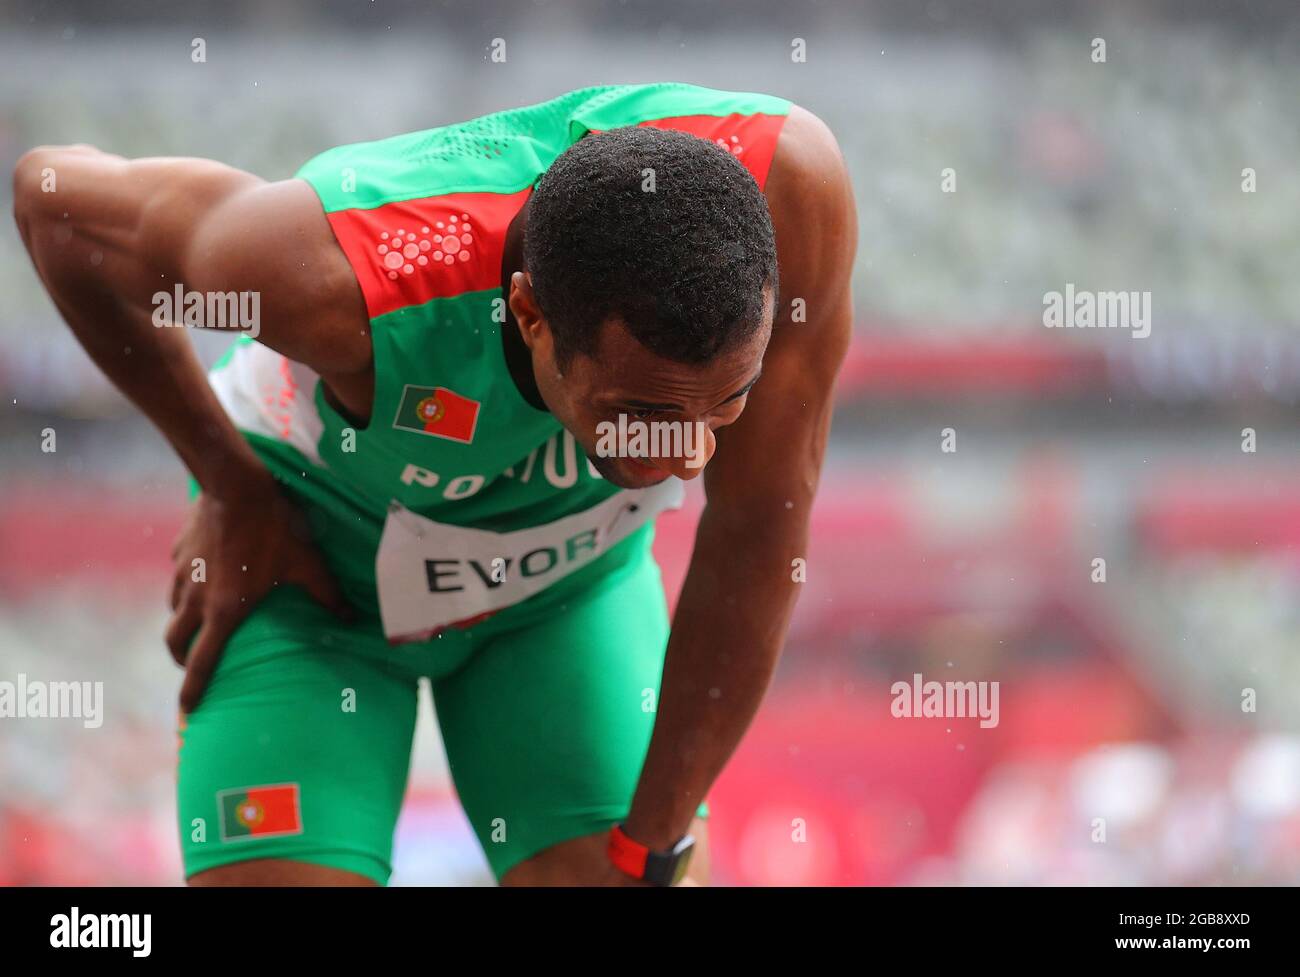 Tokyo, Japan. 3rd Aug, 2021. Nelson Evora of Portugal reacts during the  men's triple jump qualification at Tokyo 2020 Olympic Games, in Tokyo,  Japan, Aug. 3, 2021. Credit: Li Ming/Xinhua/Alamy Live News